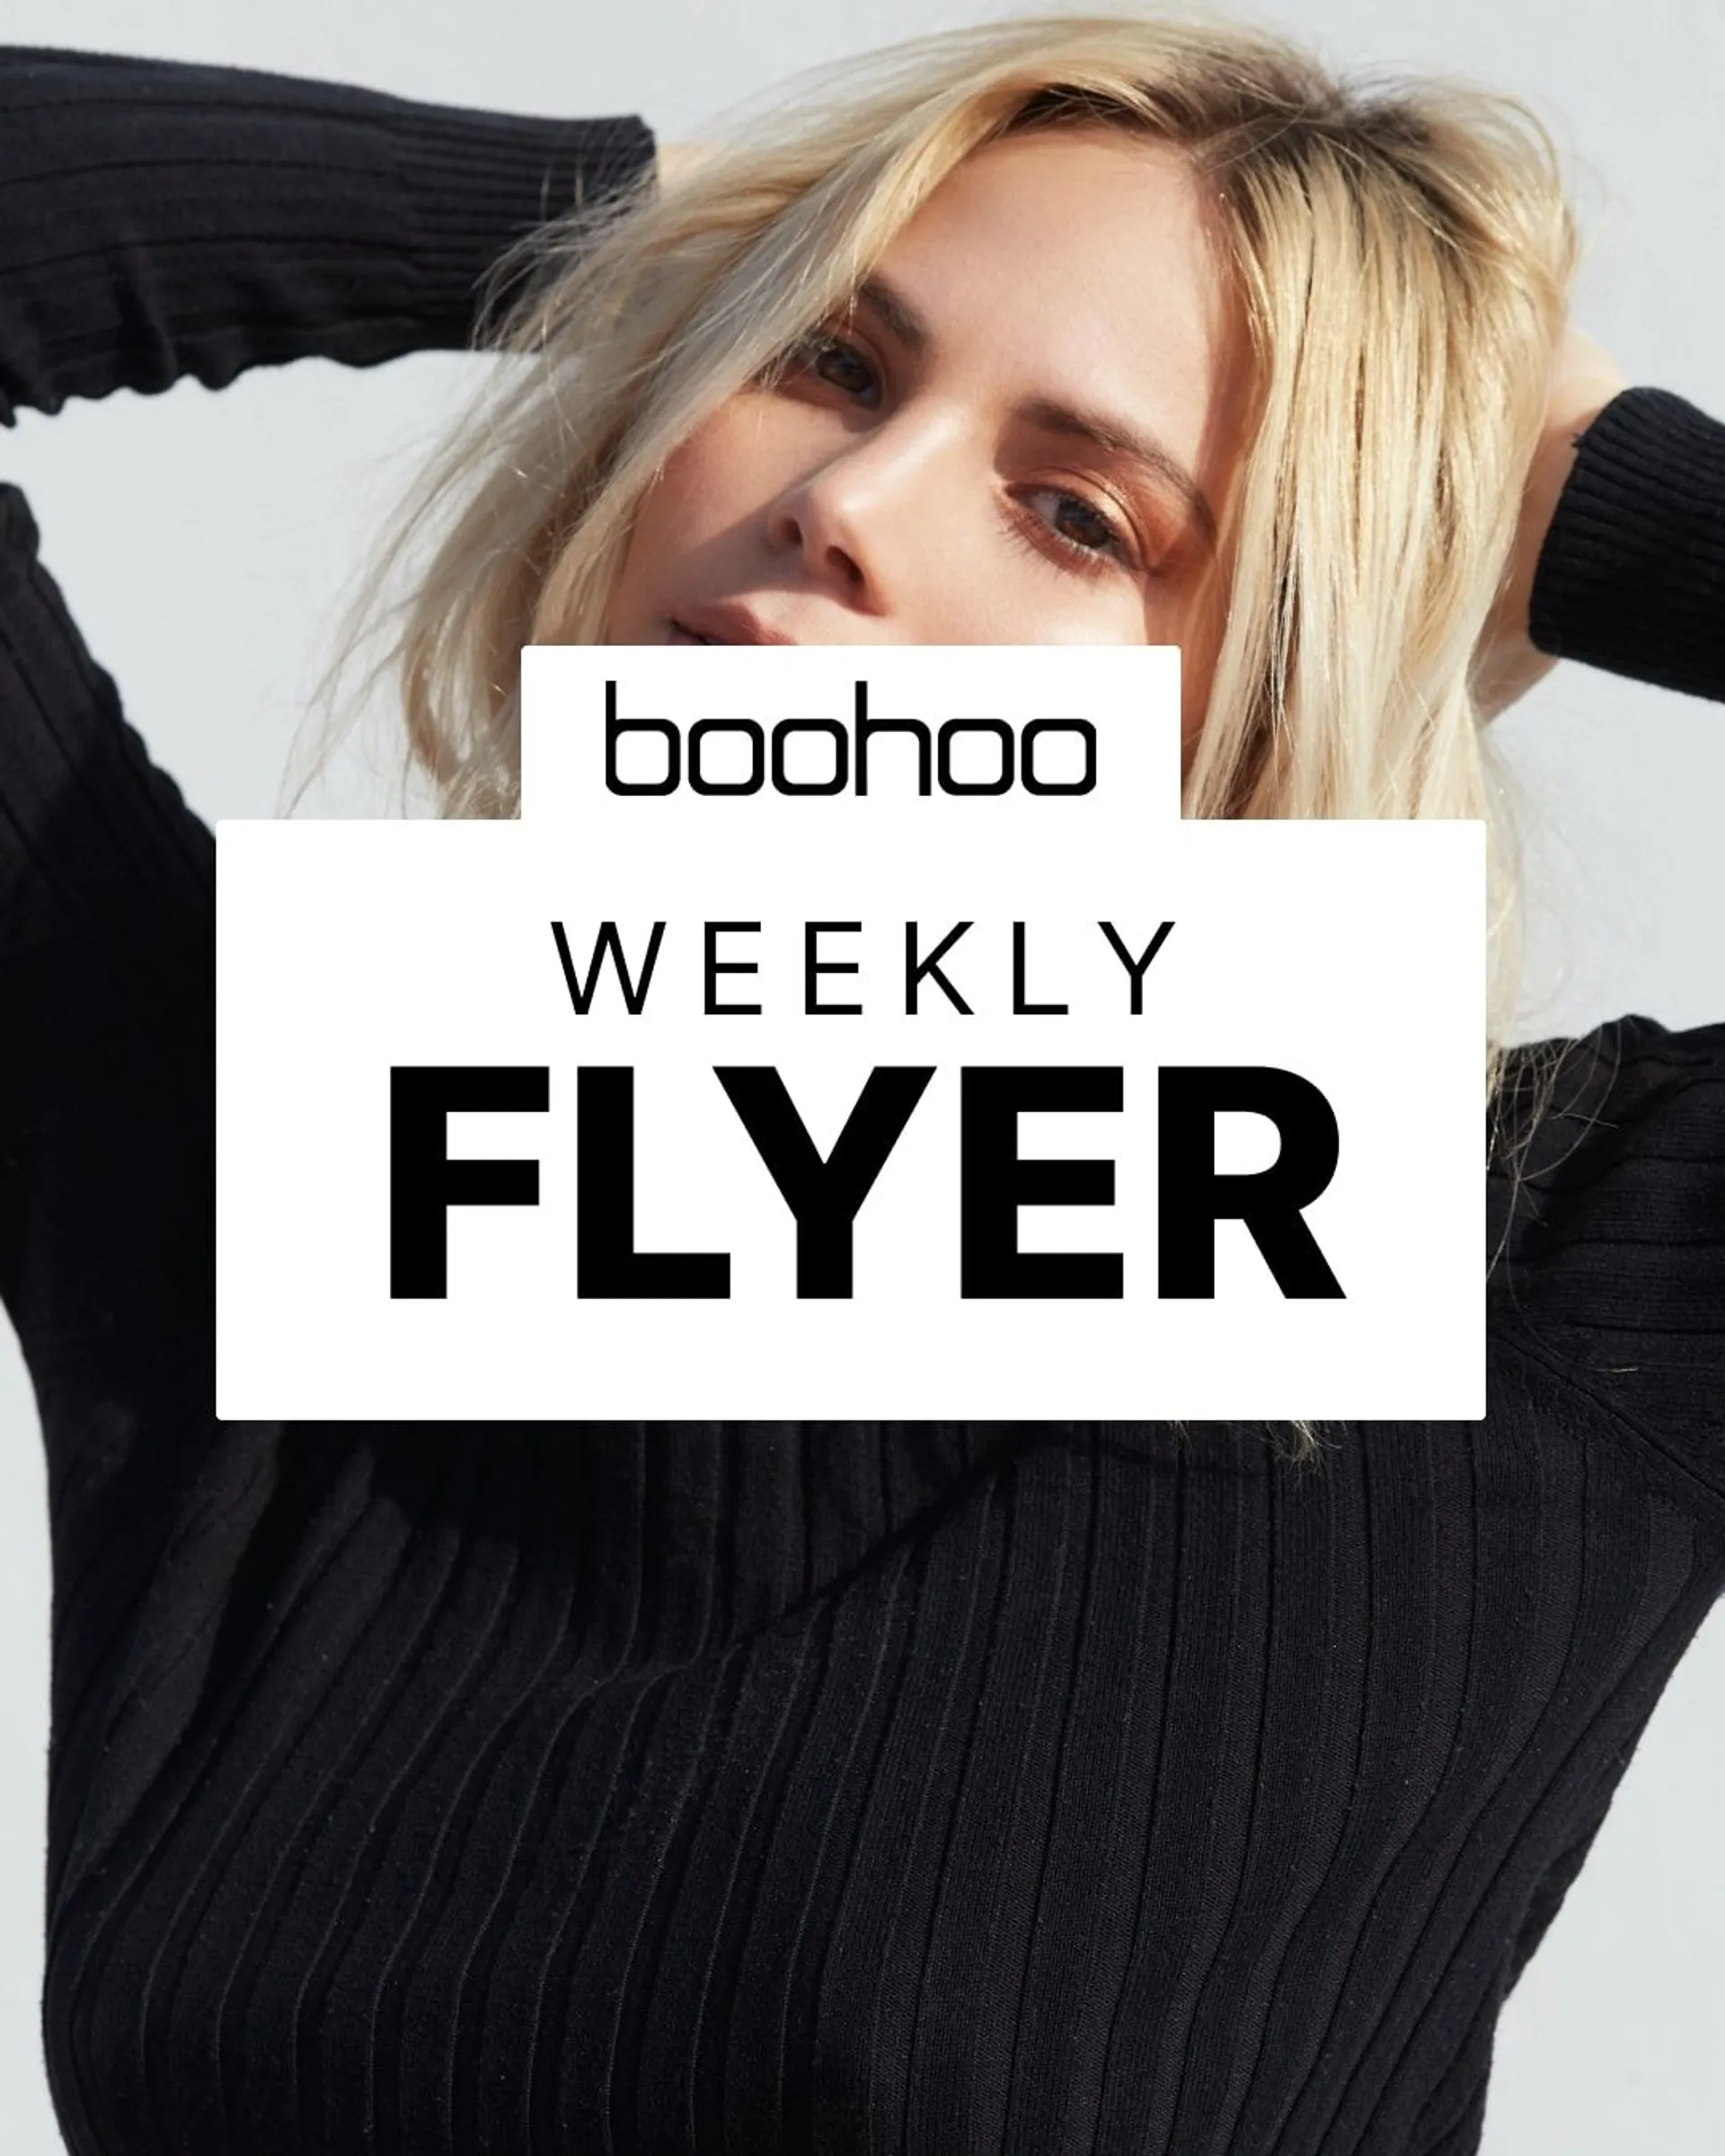 Boohoo - UP TO 70% OFF! from 29 January to 3 February 2023 - Catalogue Page 1